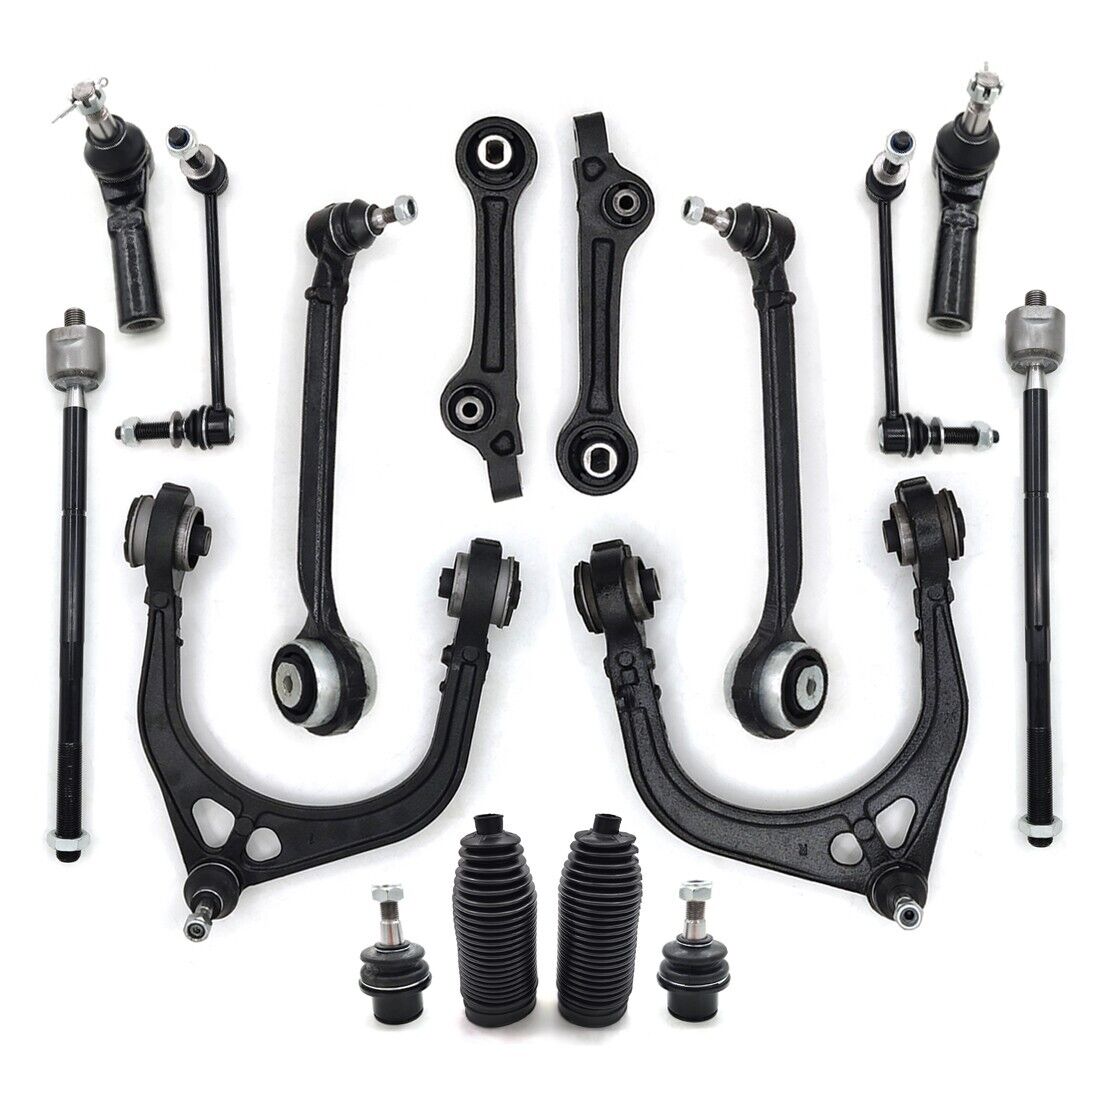 AzbuStag Control Arm for 2011-2020 Dodge Charger Chrysler 300 RWD - 16Pcs